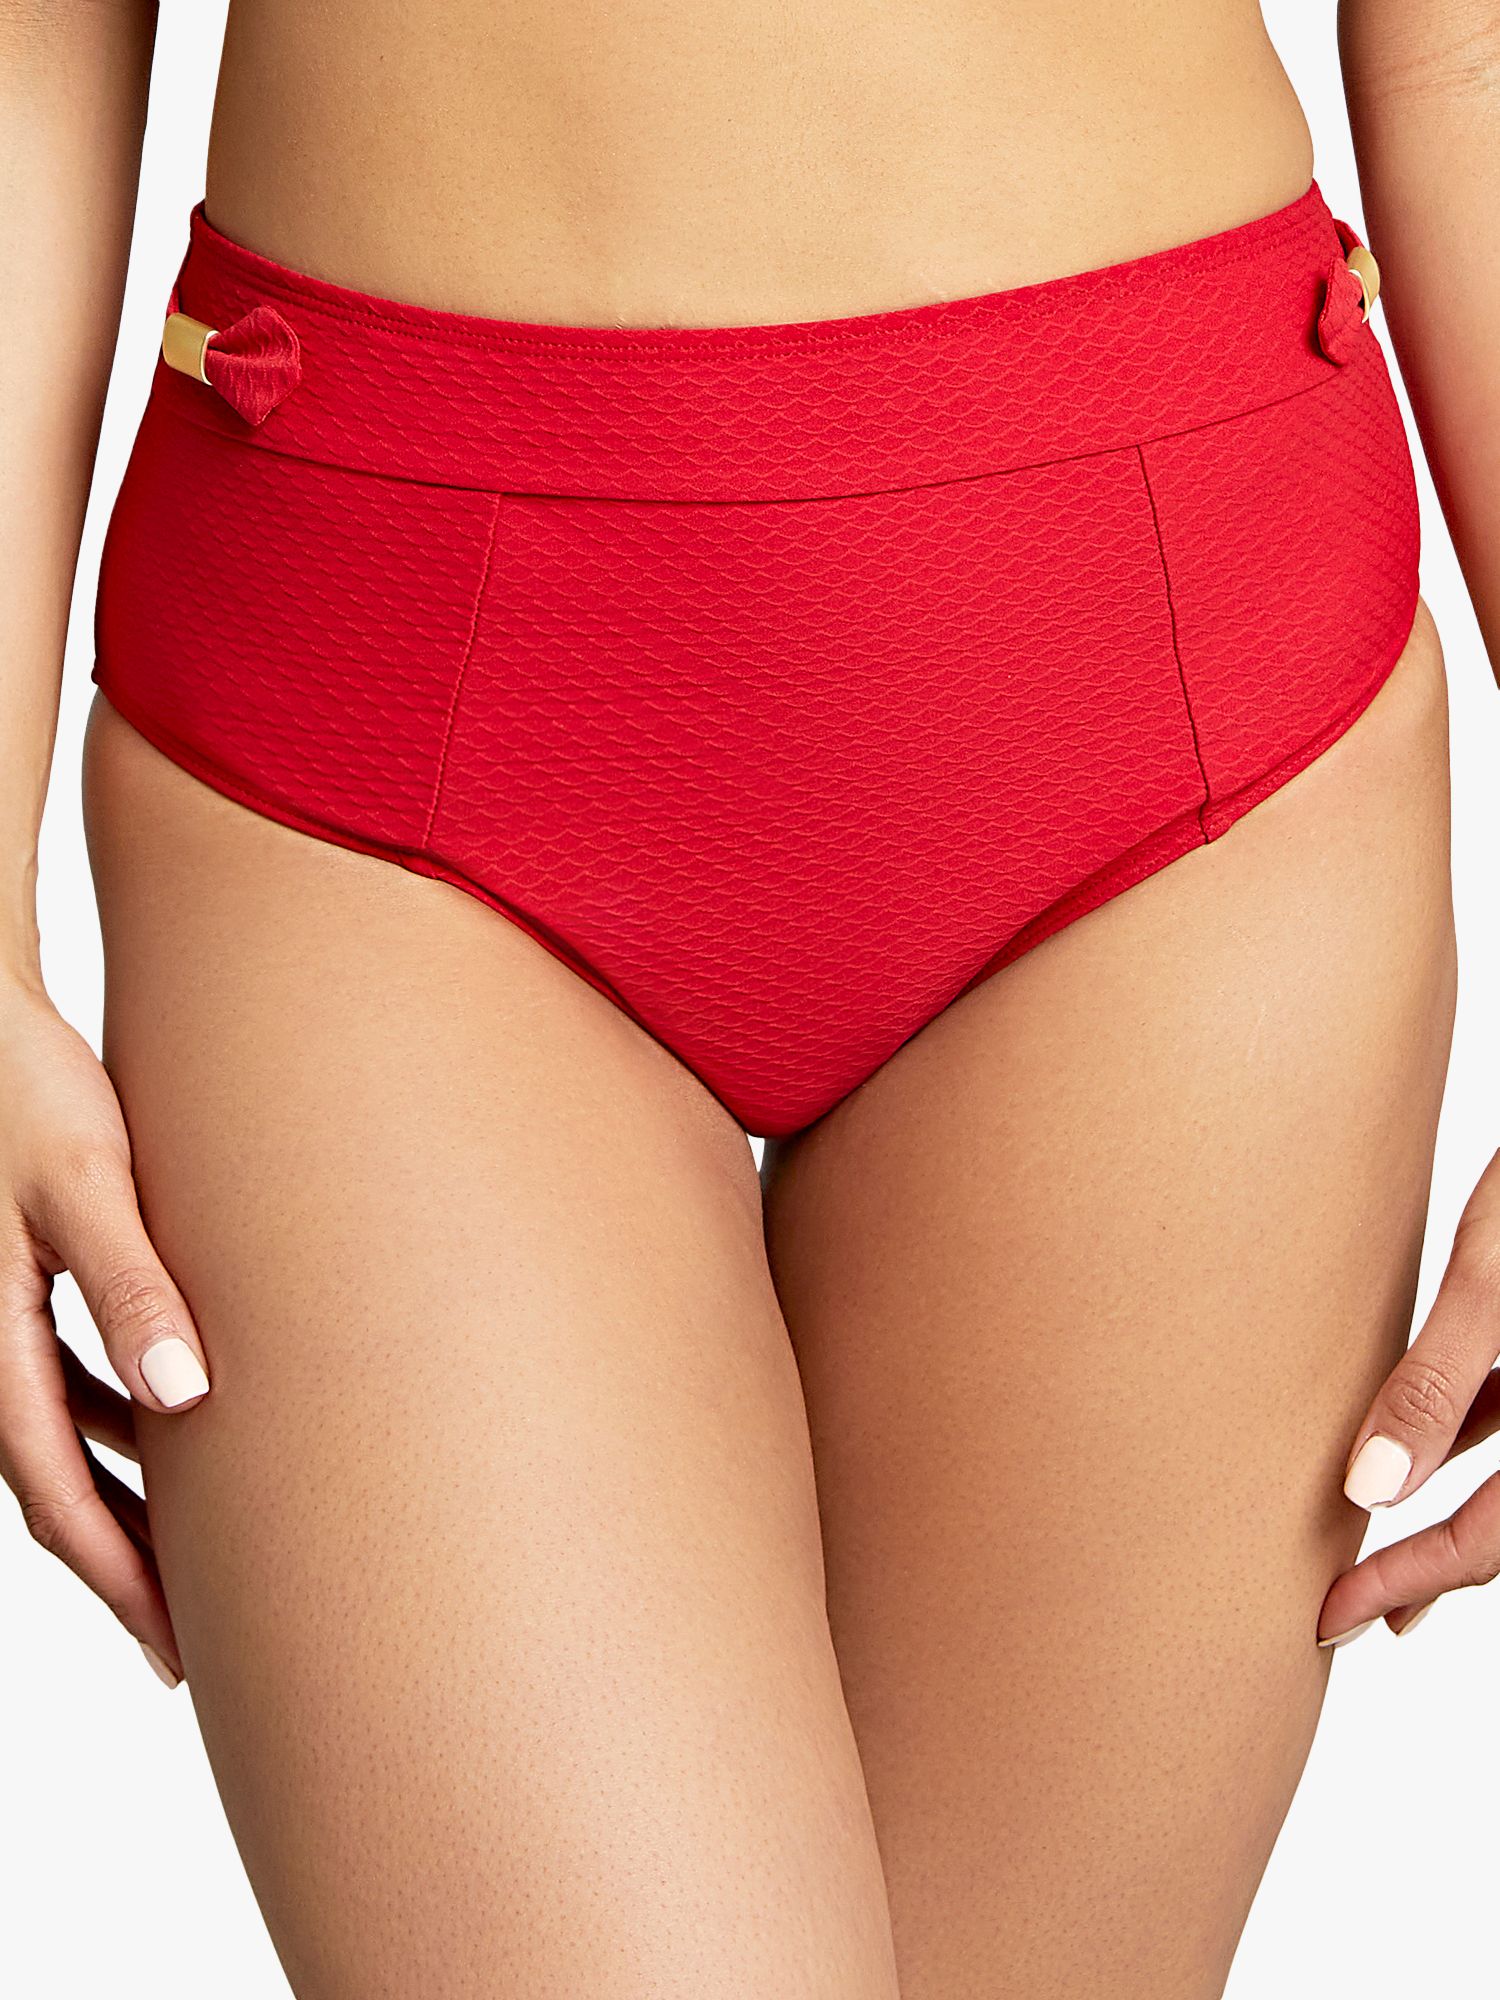 Reversible Selin High waist Thong - WE ARE WE WEAR